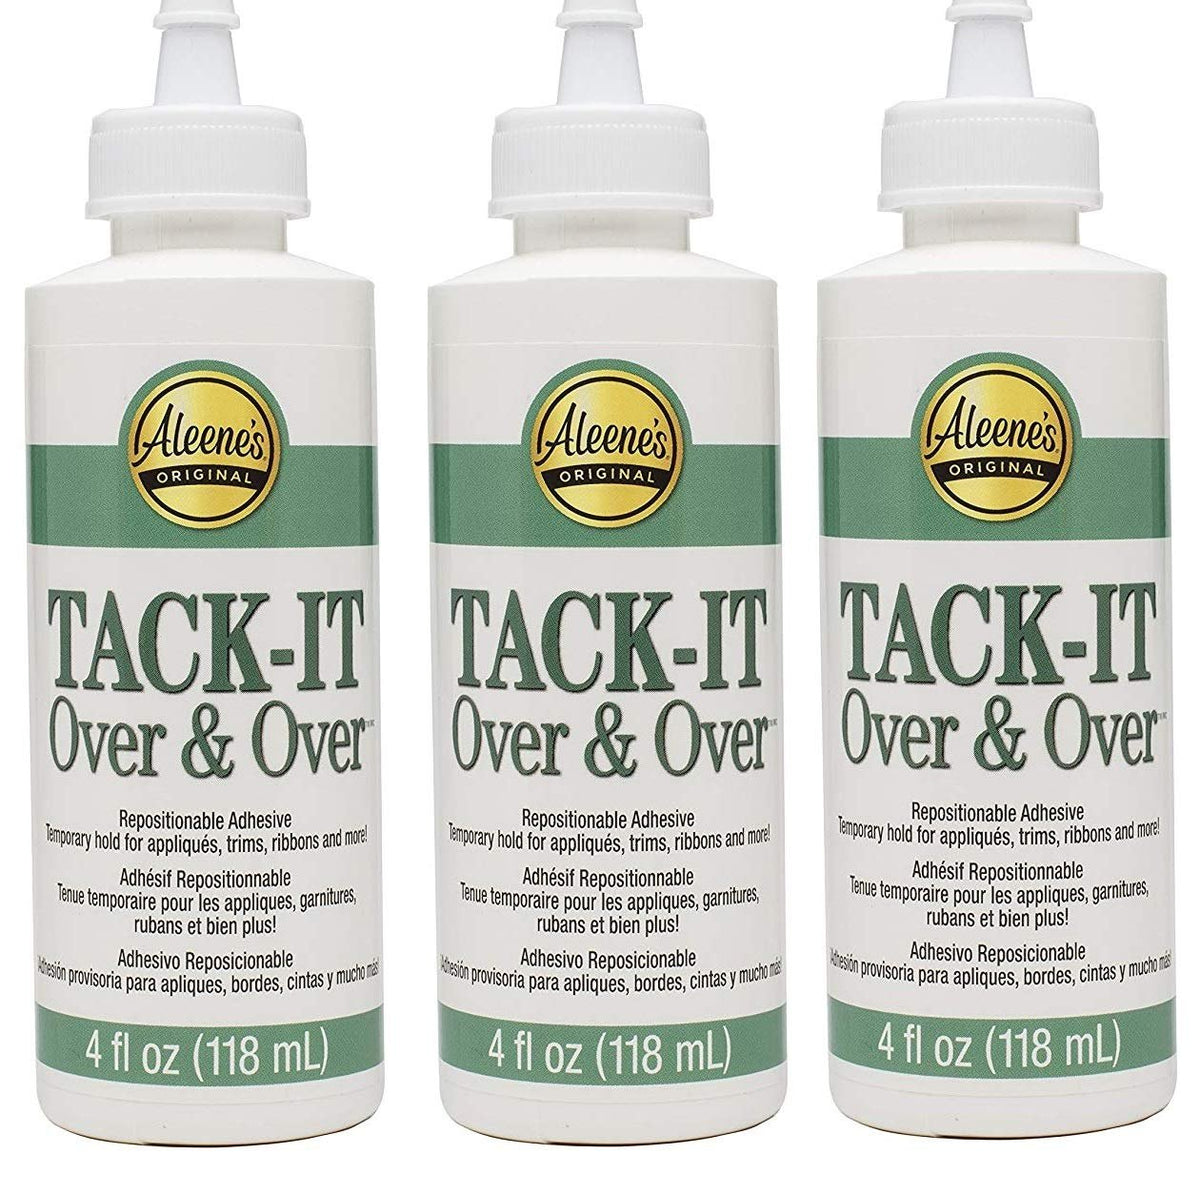 Tack-It Over and Over Adhesive